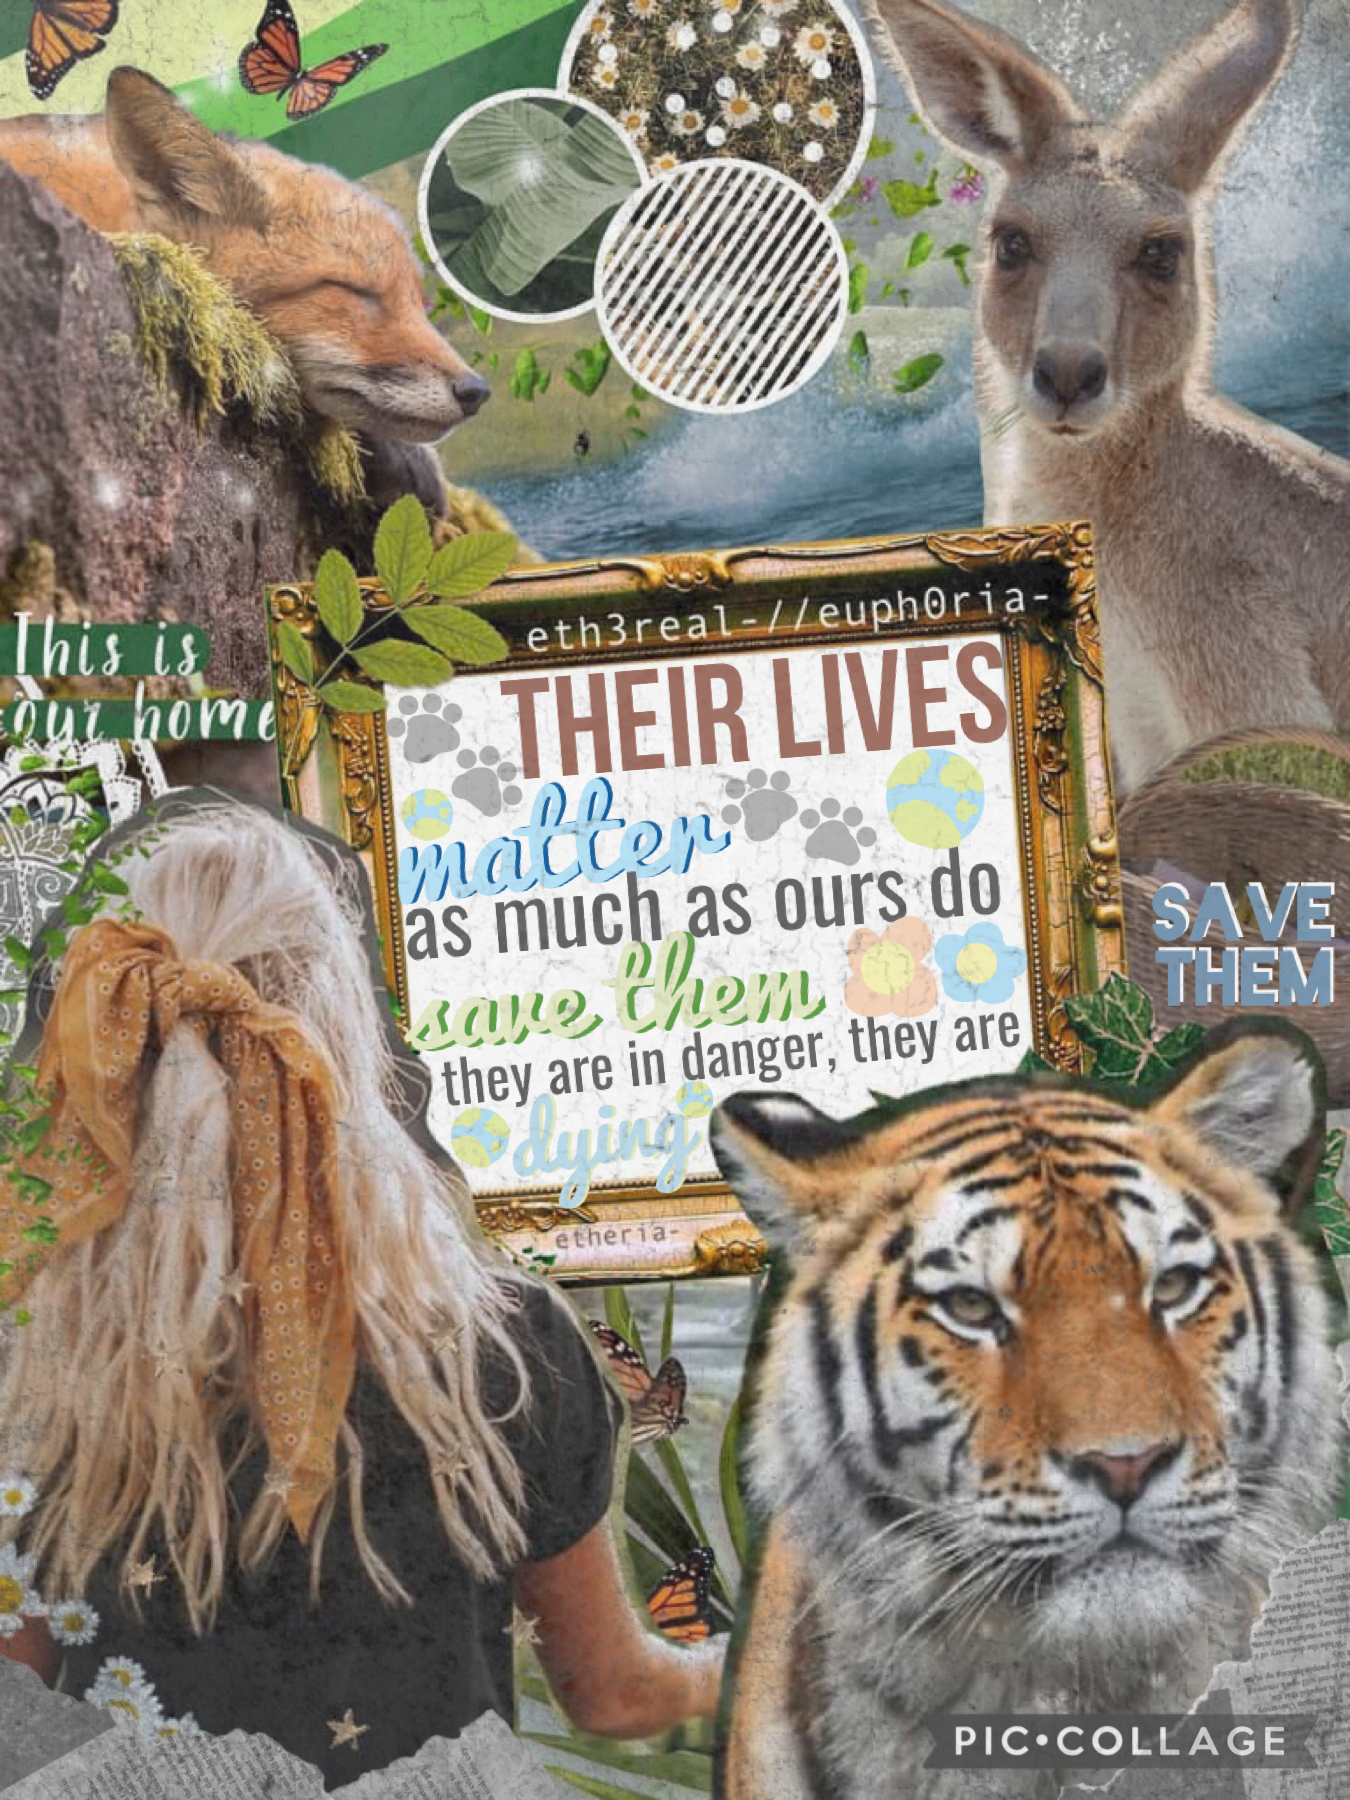 🐾8/5/21🐾
collab with catie @euph0ria- who did the stunning bg, inspired by @clear-blue-water. theme: world wildlife day, their lives matter too! I did the horrible text, it’s like my worst and let’s not speak of it. proud of the little doodles I did haha-